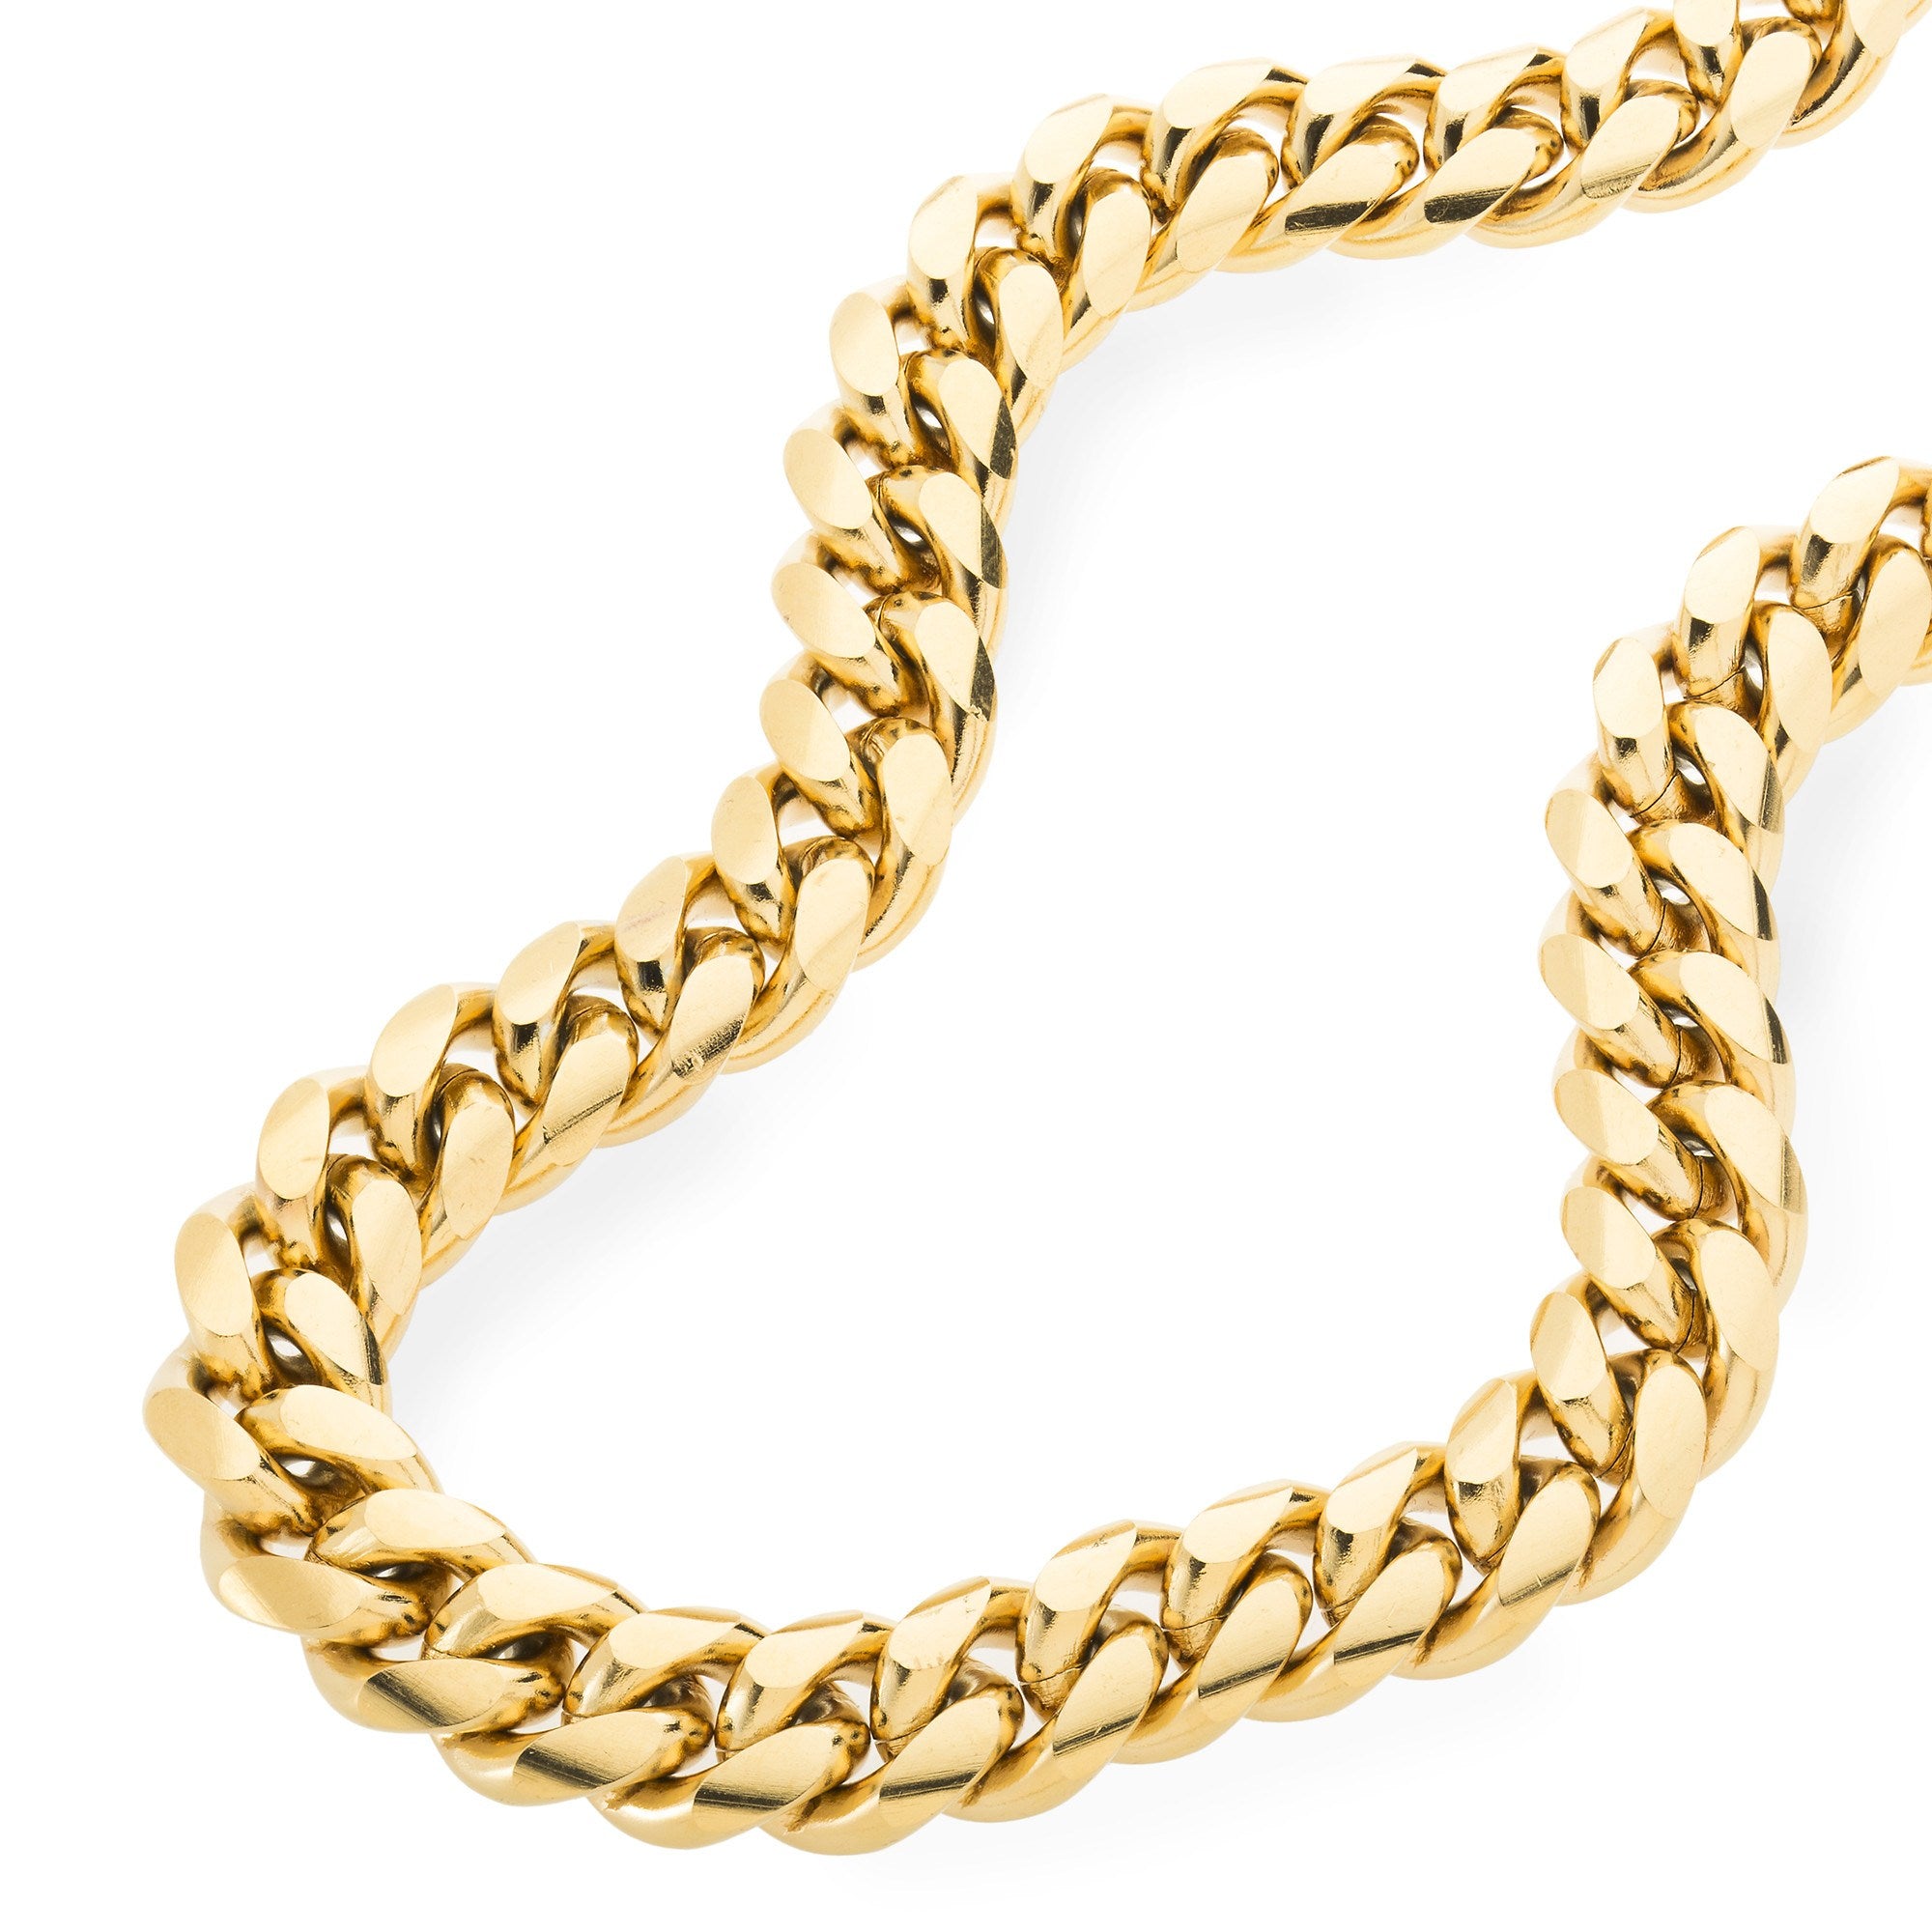 Luxfine 10/12mm Miami Cuban Link Chain 14K Real Gold Plated Premium Stainless Steel Necklace Hypoallergenic Hip Hop Jewelry for Men Women Christmas